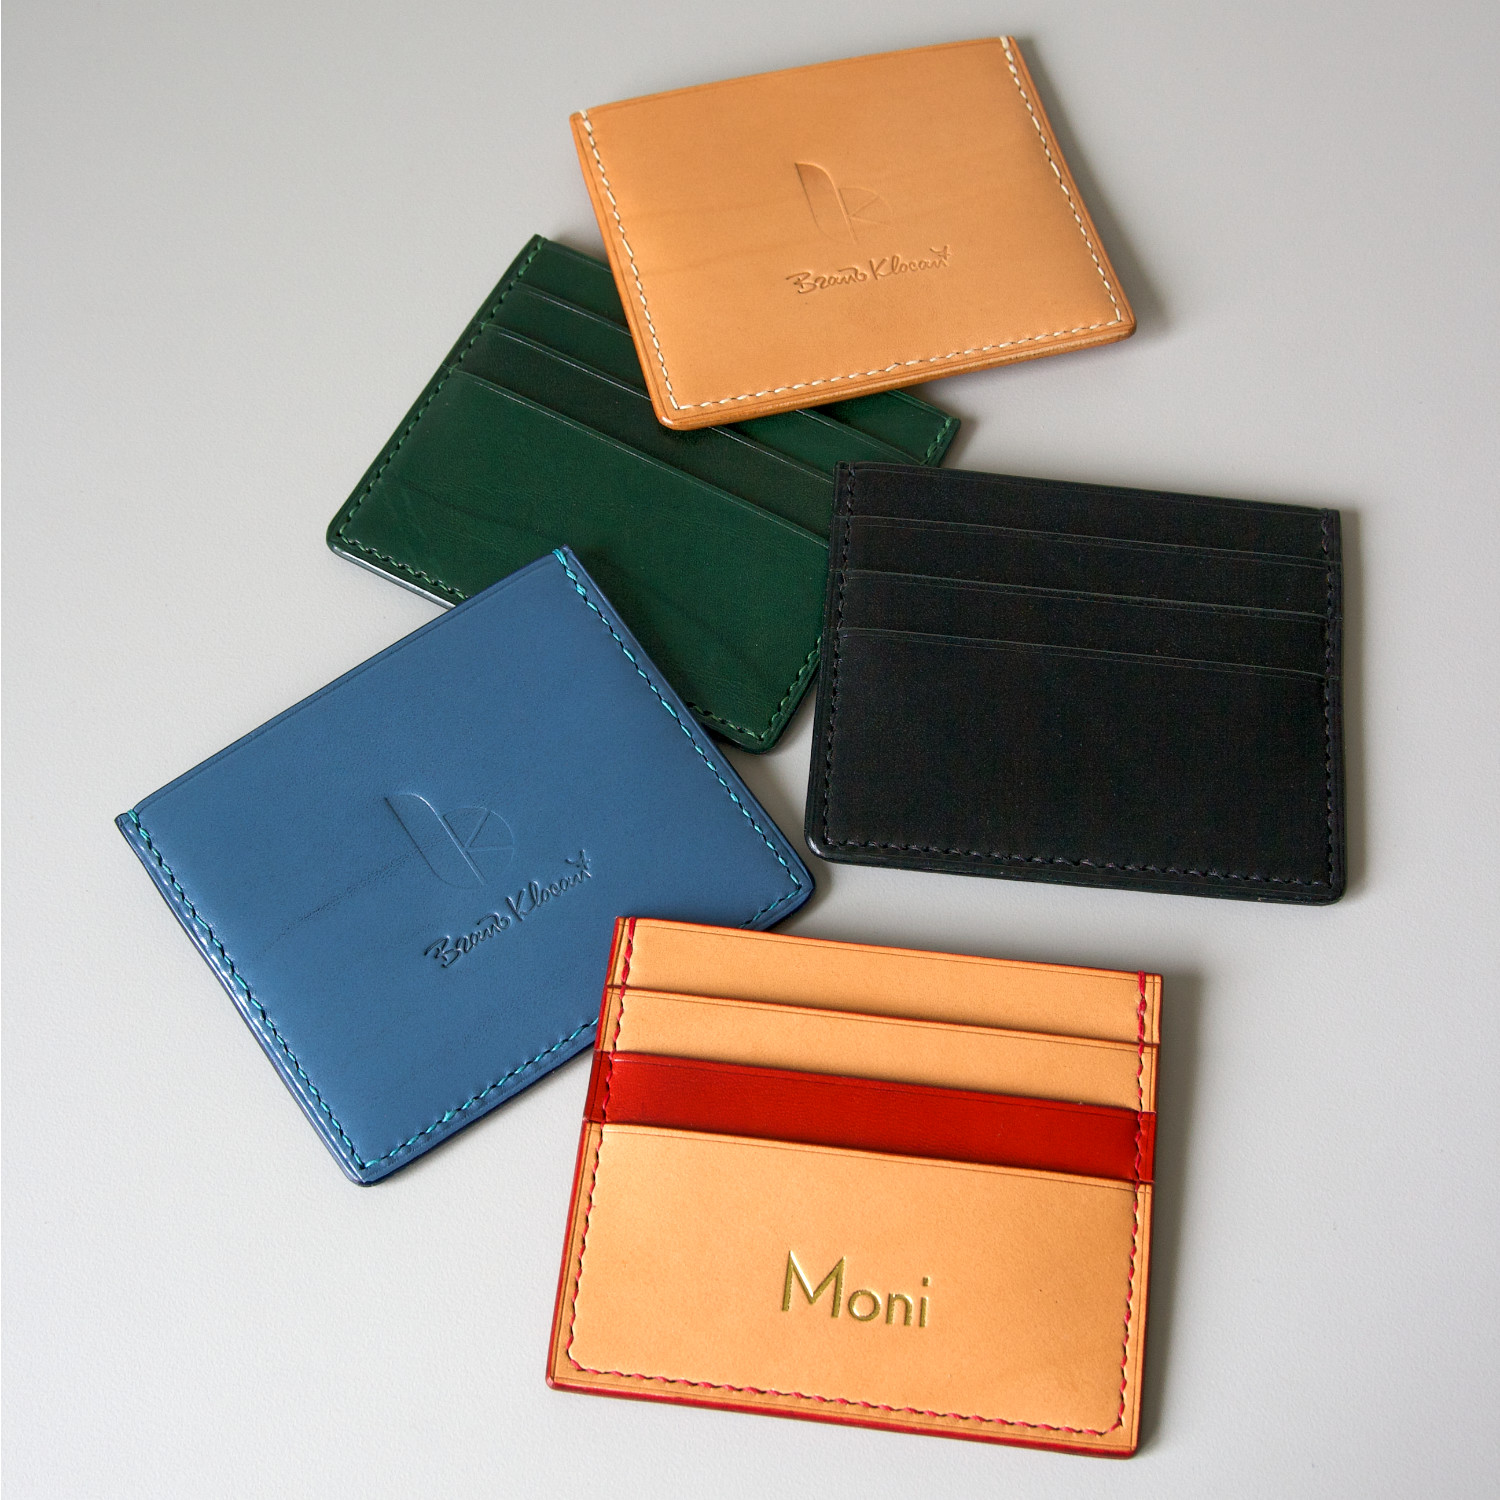 leather cardholders lying on table